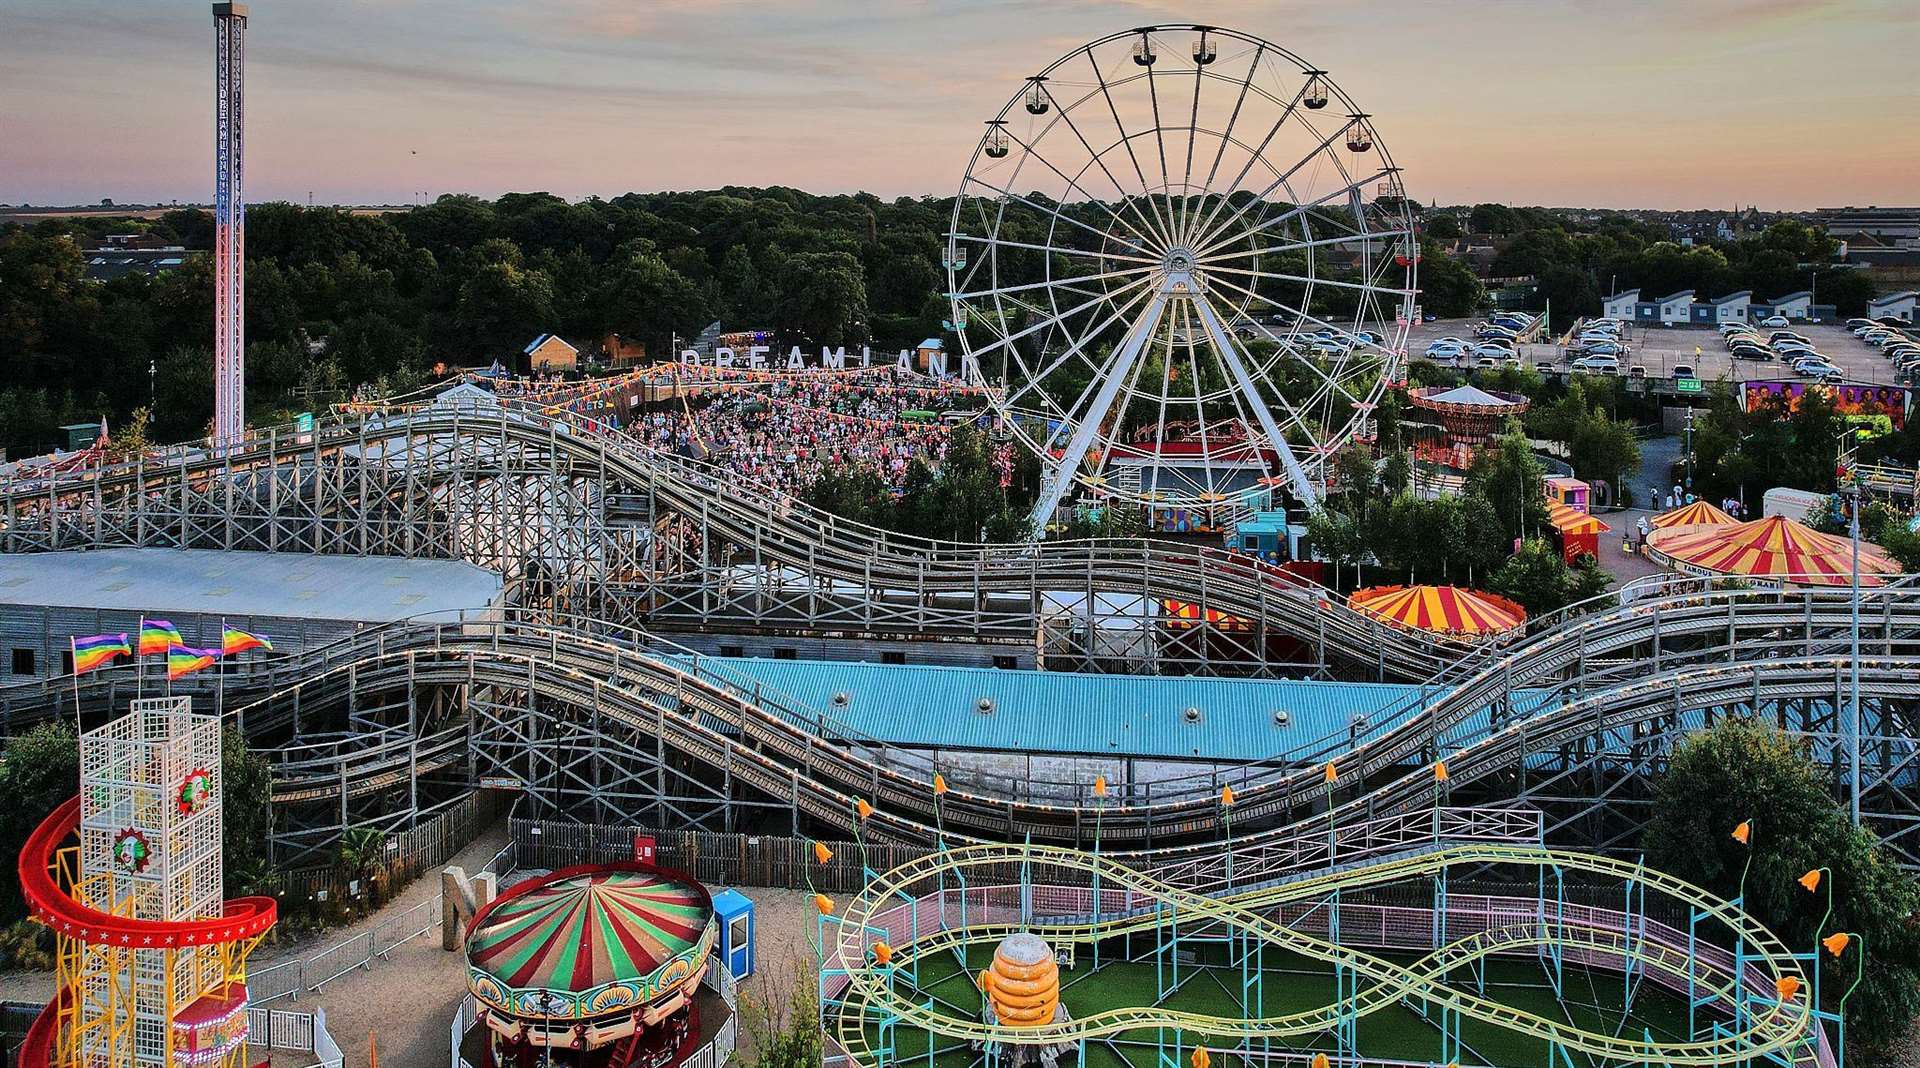 Dreamland is hosting the Margate Summer Series this year with artists such as Tom Jones, Queens of the Stone Age and Olly Murs set to perform. Picture: Dreamland